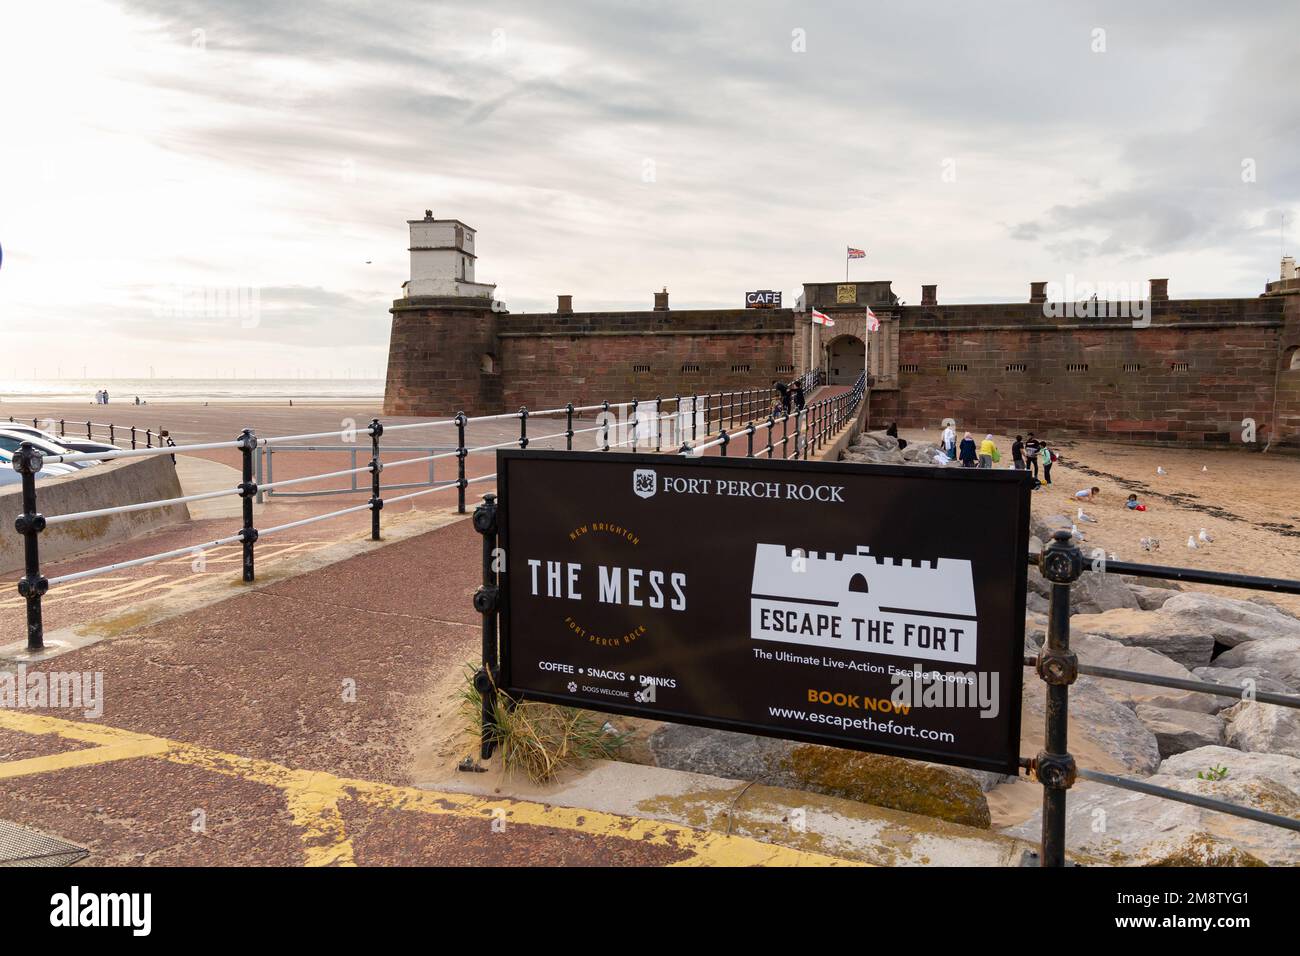 New Brighton, UK: Fort Perch Rock entrance and sign for The Mess cafe and escape rooms. Stock Photo